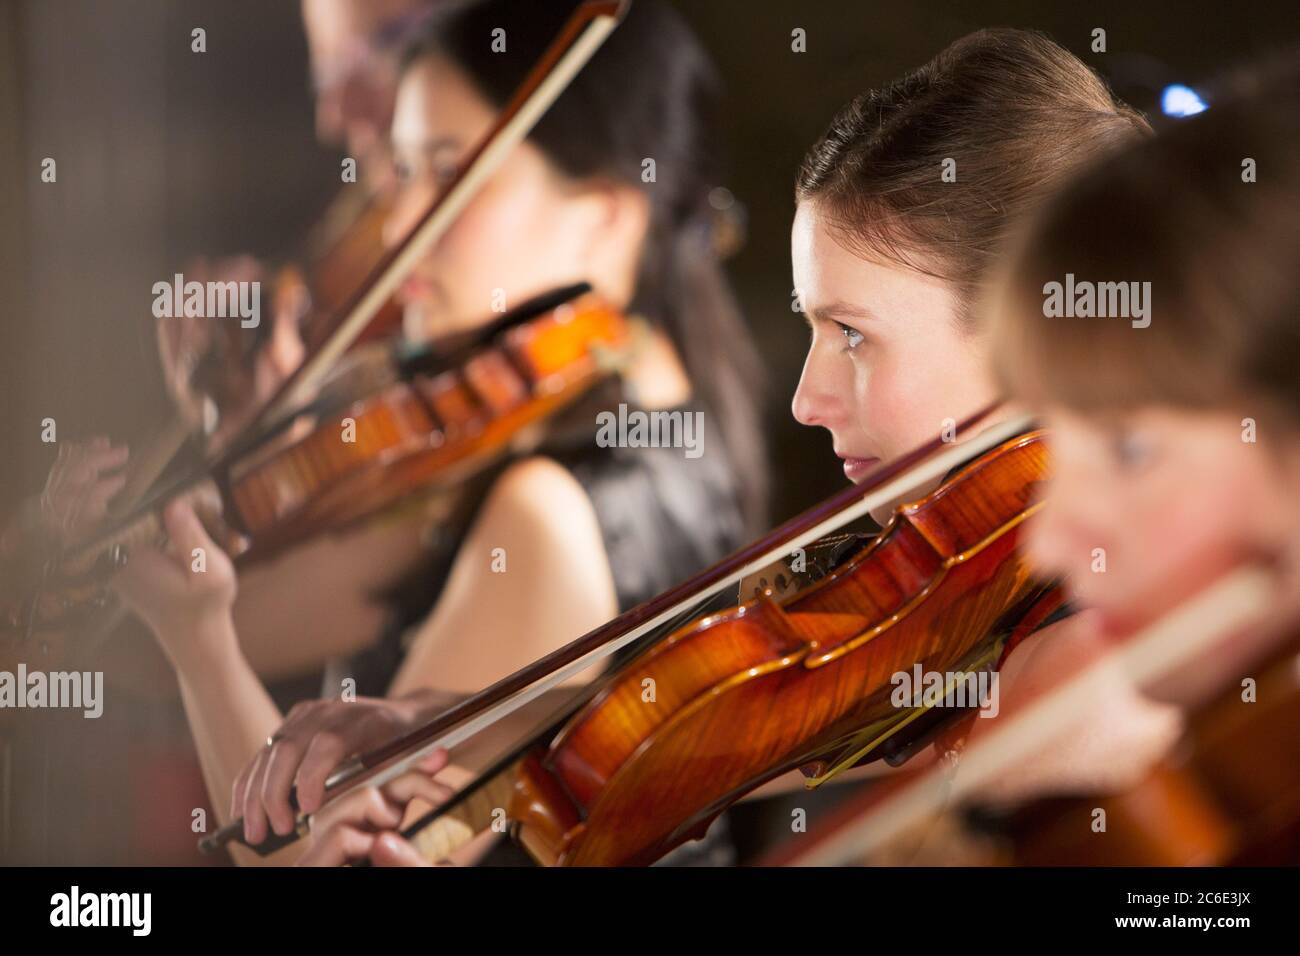 Violinists performing Stock Photo